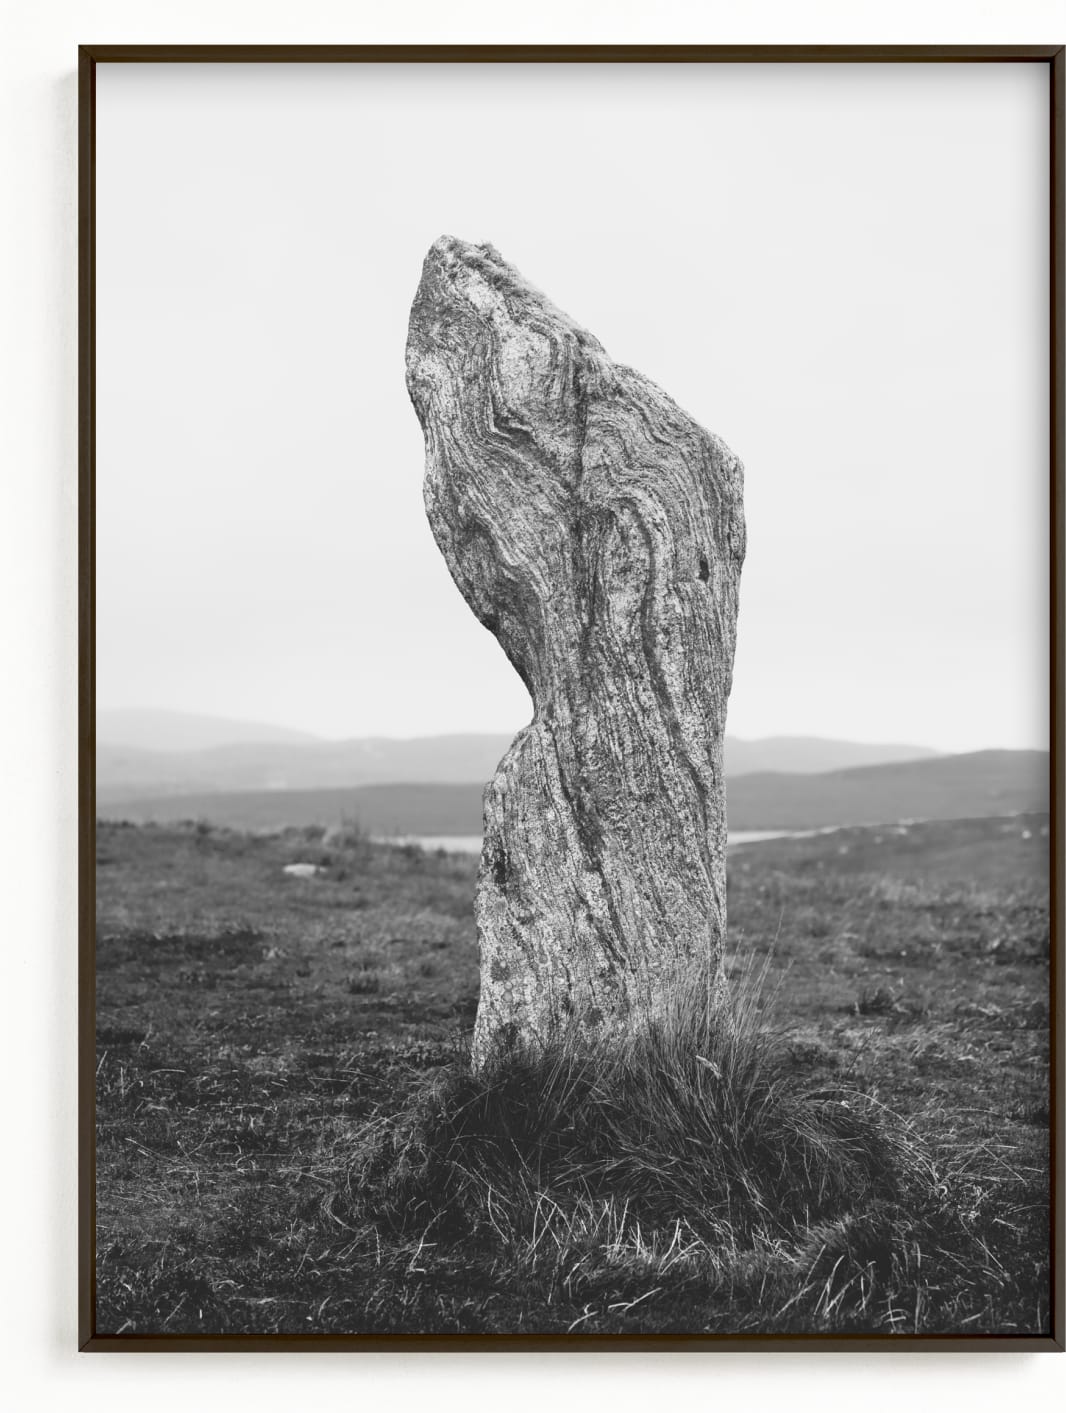 This is a black and white art by Kamala Nahas called Standing Stones II.